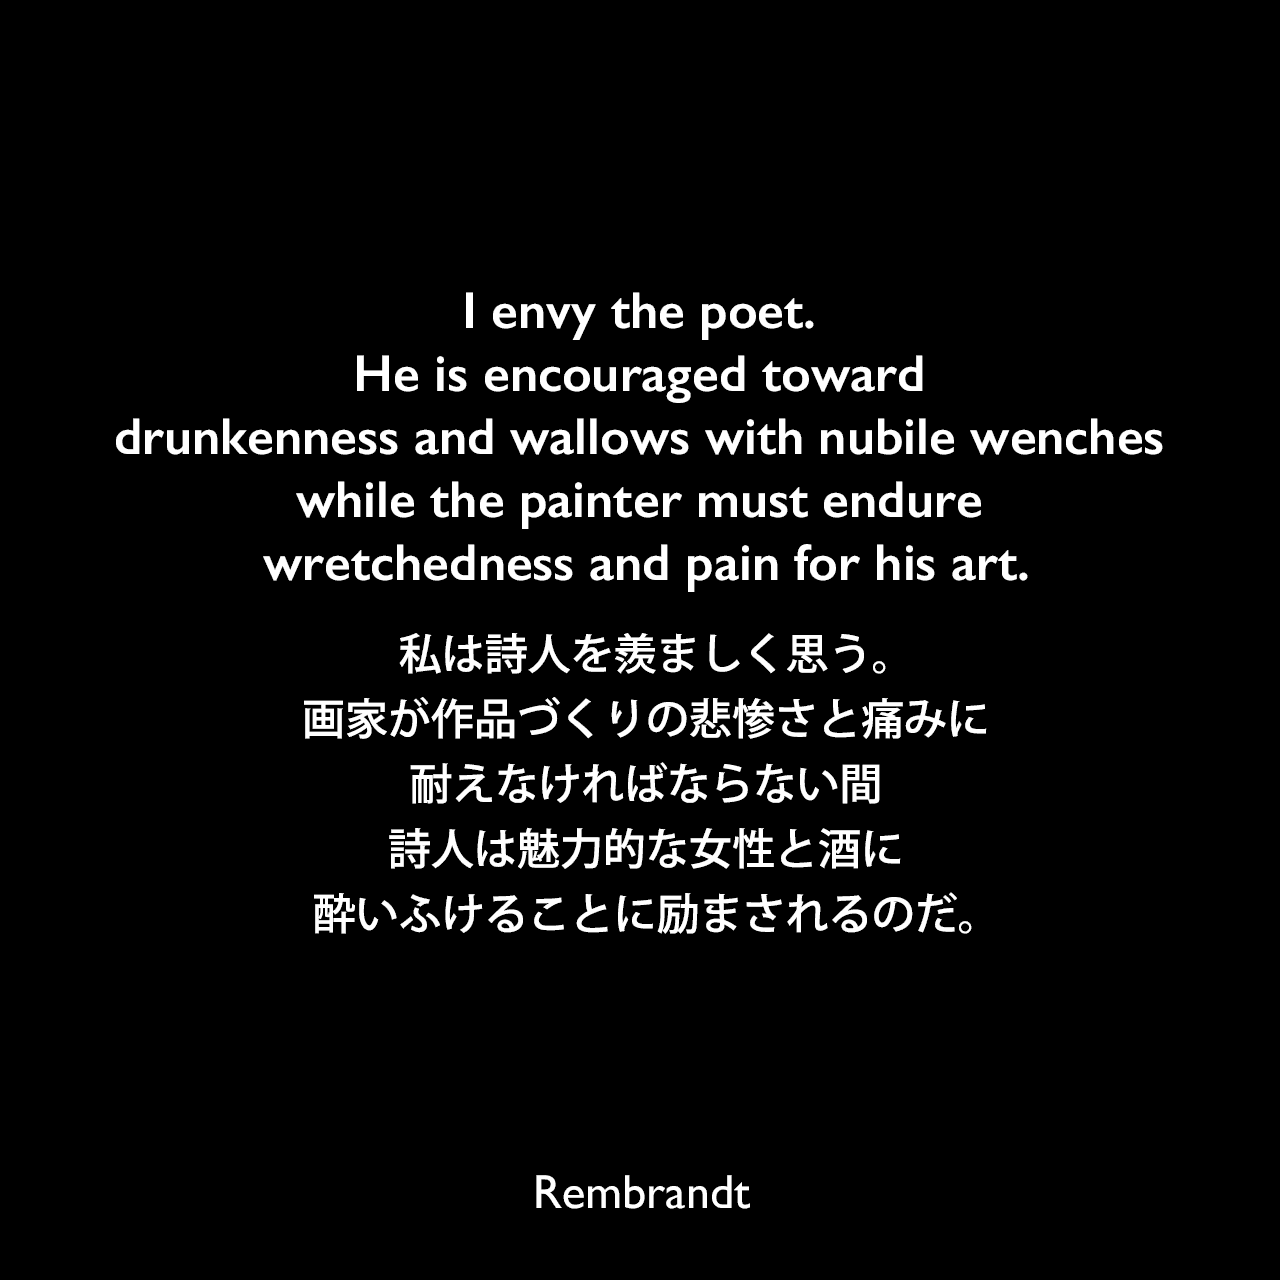 I envy the poet. He is encouraged toward drunkenness and wallows with nubile wenches while the painter must endure wretchedness and pain for his art.私は詩人を羨ましく思う。画家が作品づくりの悲惨さと痛みに耐えなければならない間、詩人は魅力的な女性と酒に酔いふけることに励まされるのだ。Rembrandt